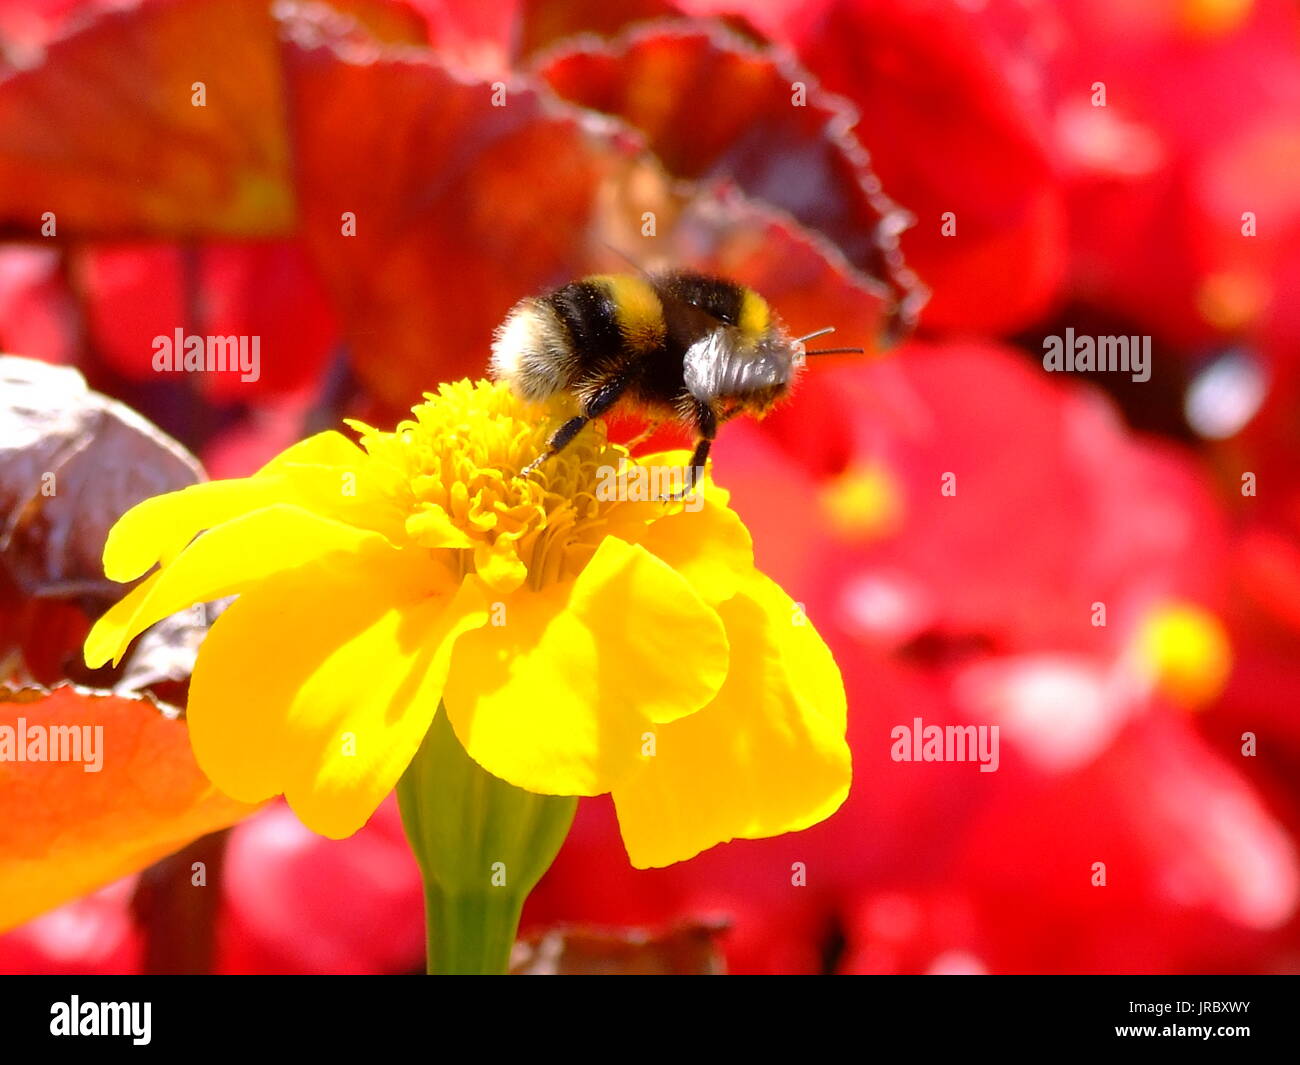 Bumble Bee Lift Off Stock Photo